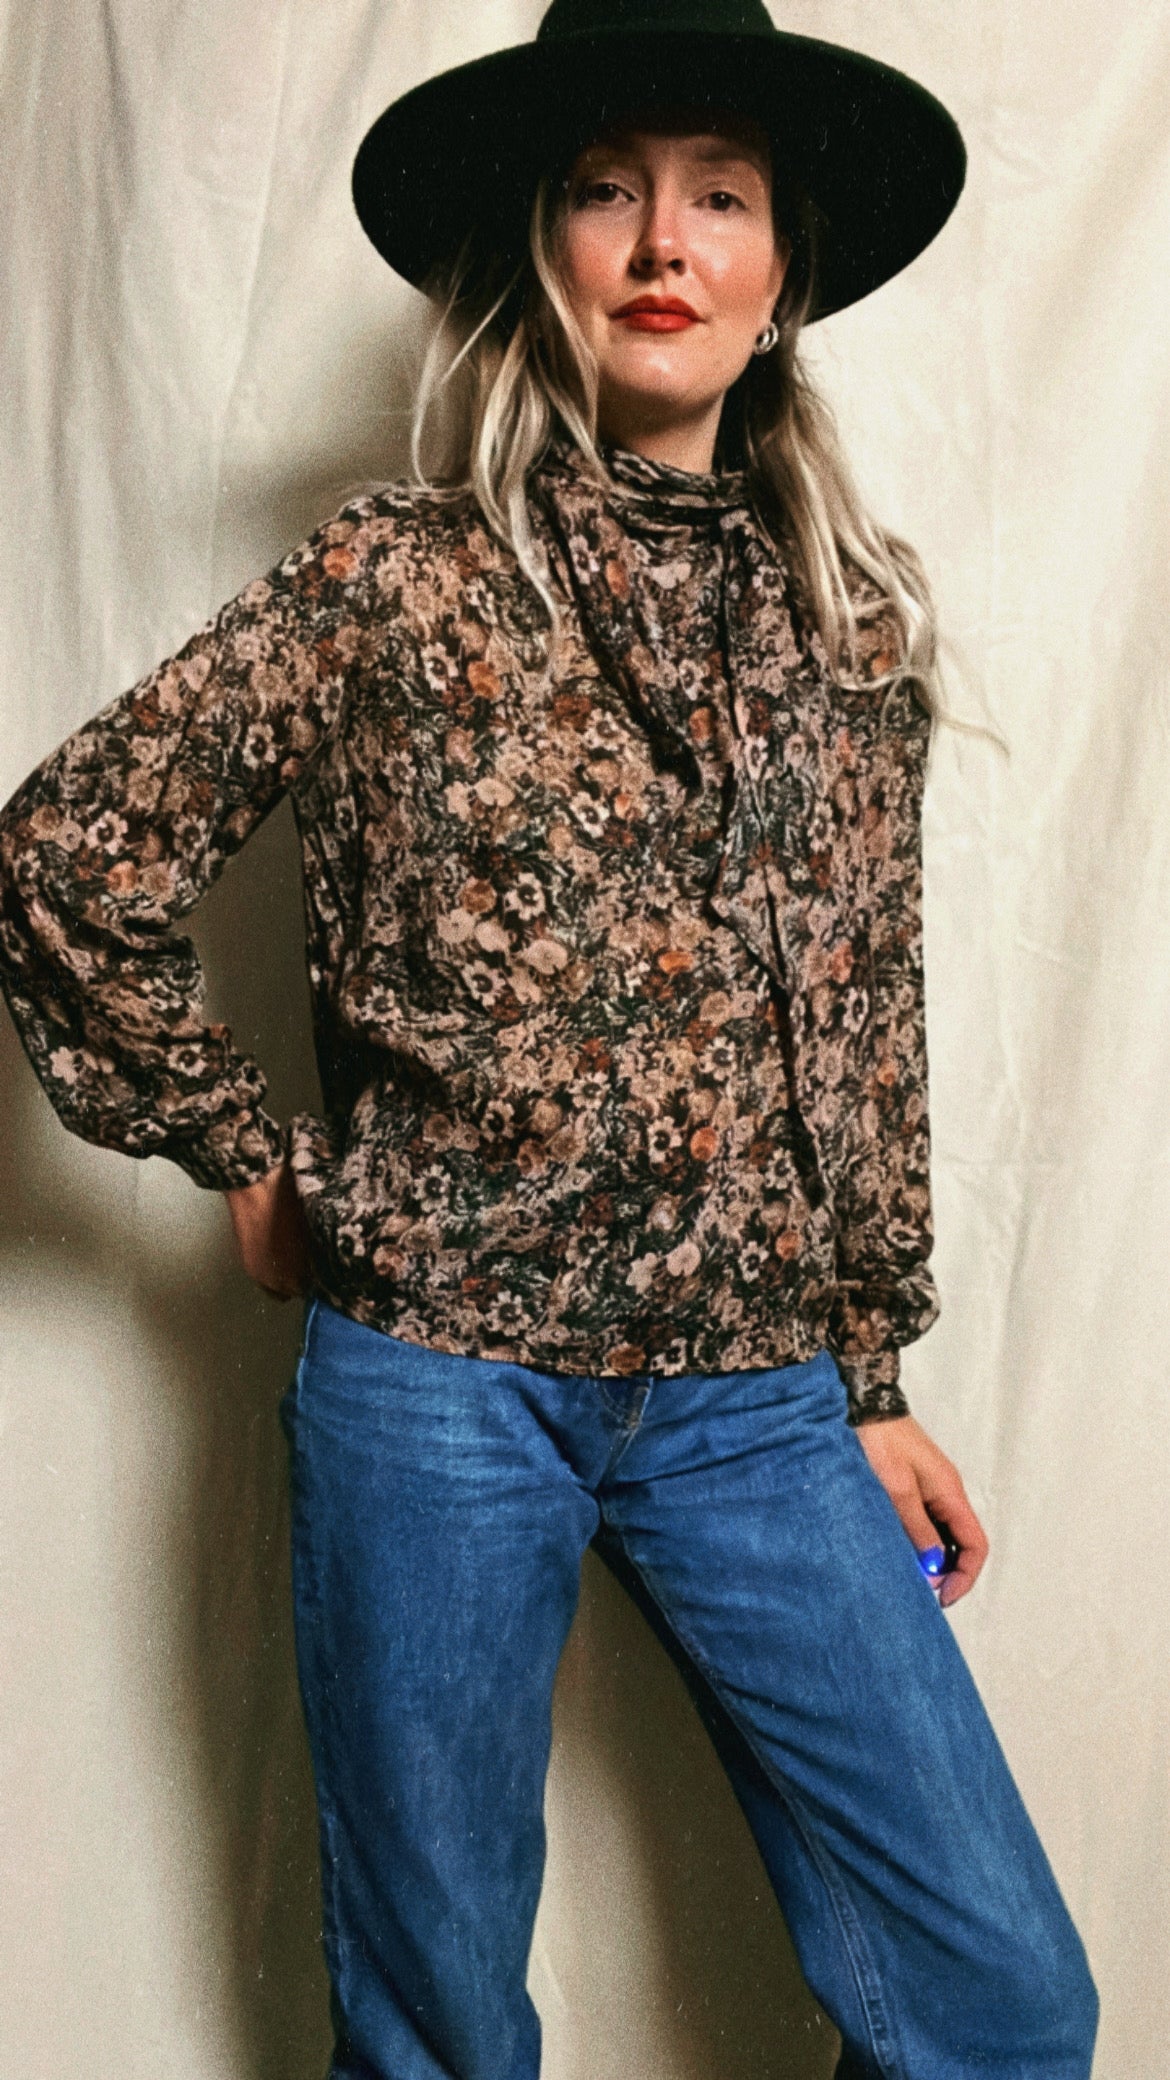 Floral shawl top